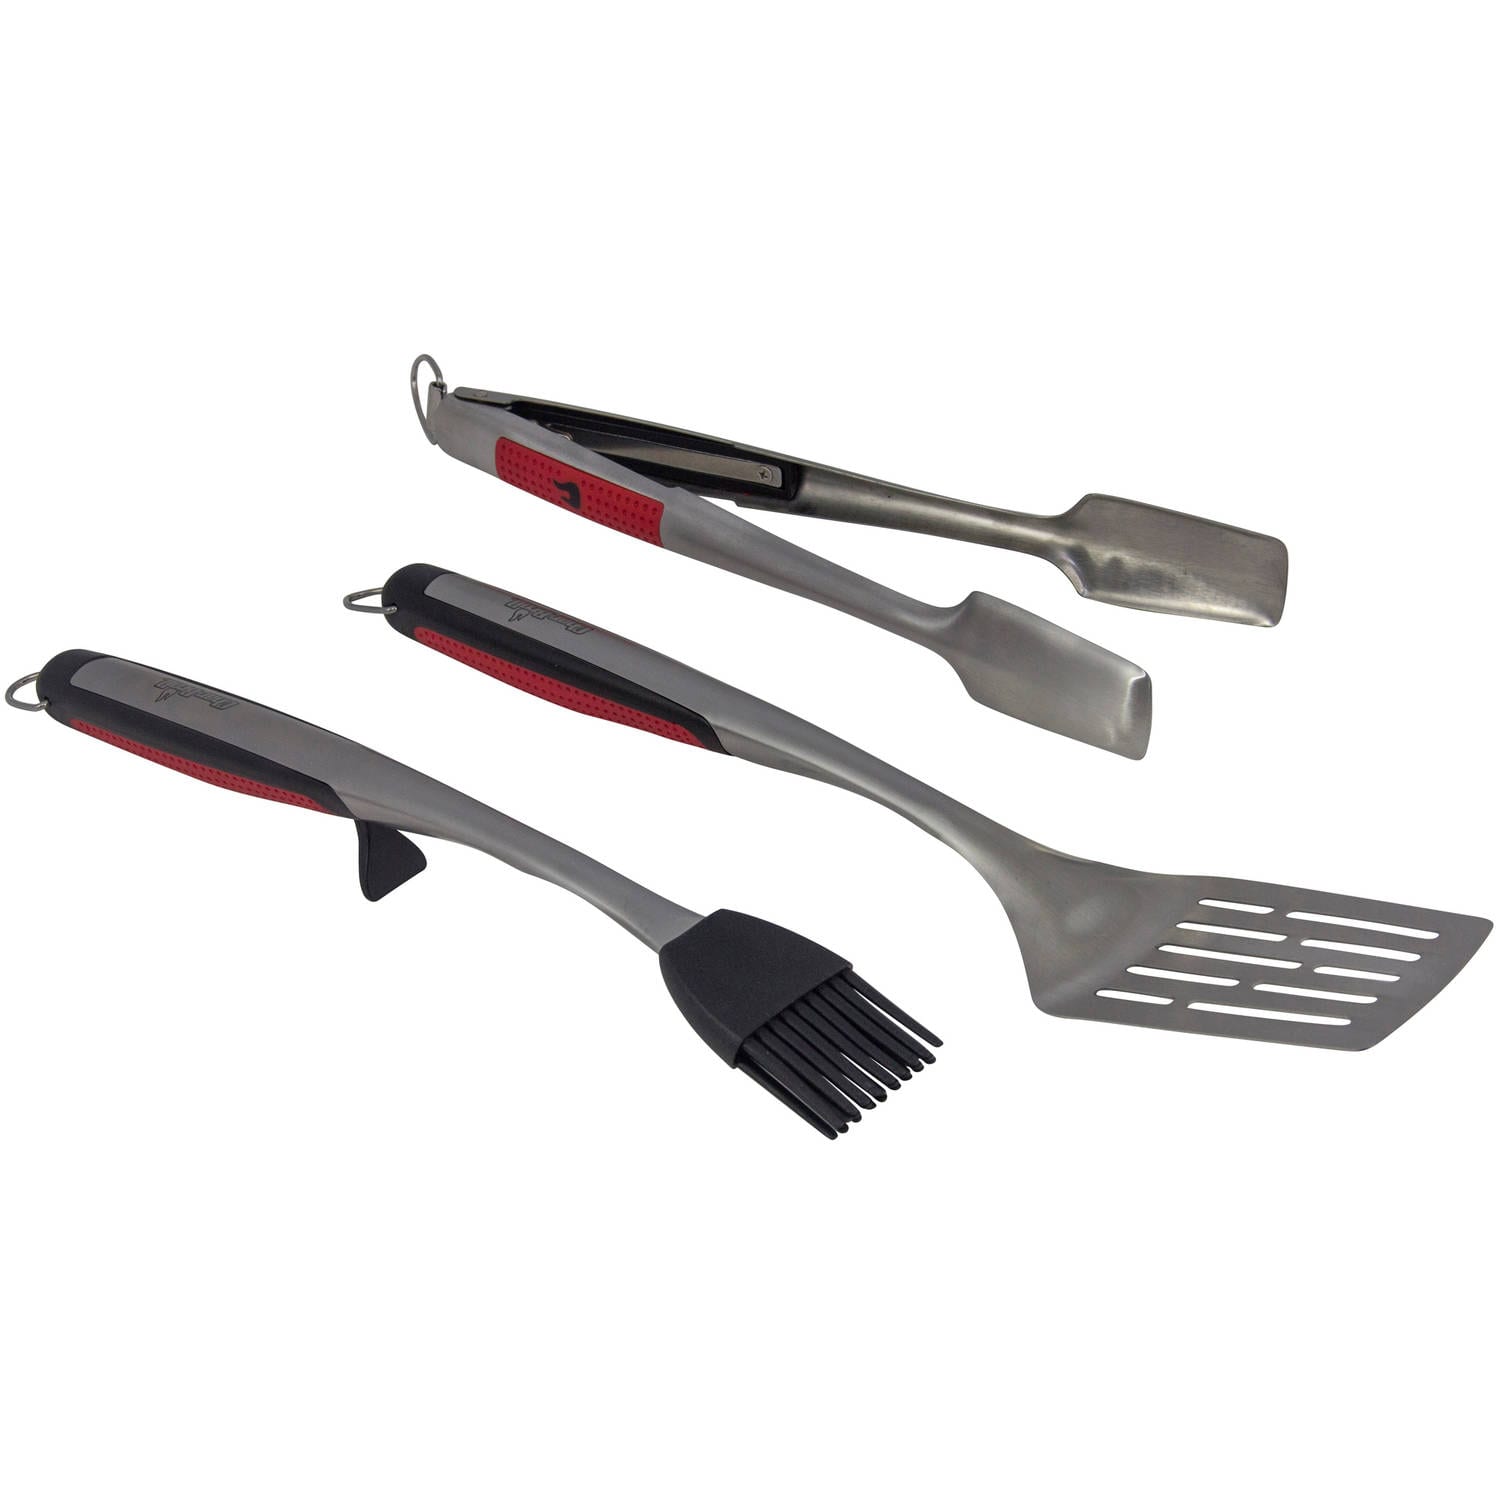 Char-Broil Comfort Grip Double-Wide Spatula 